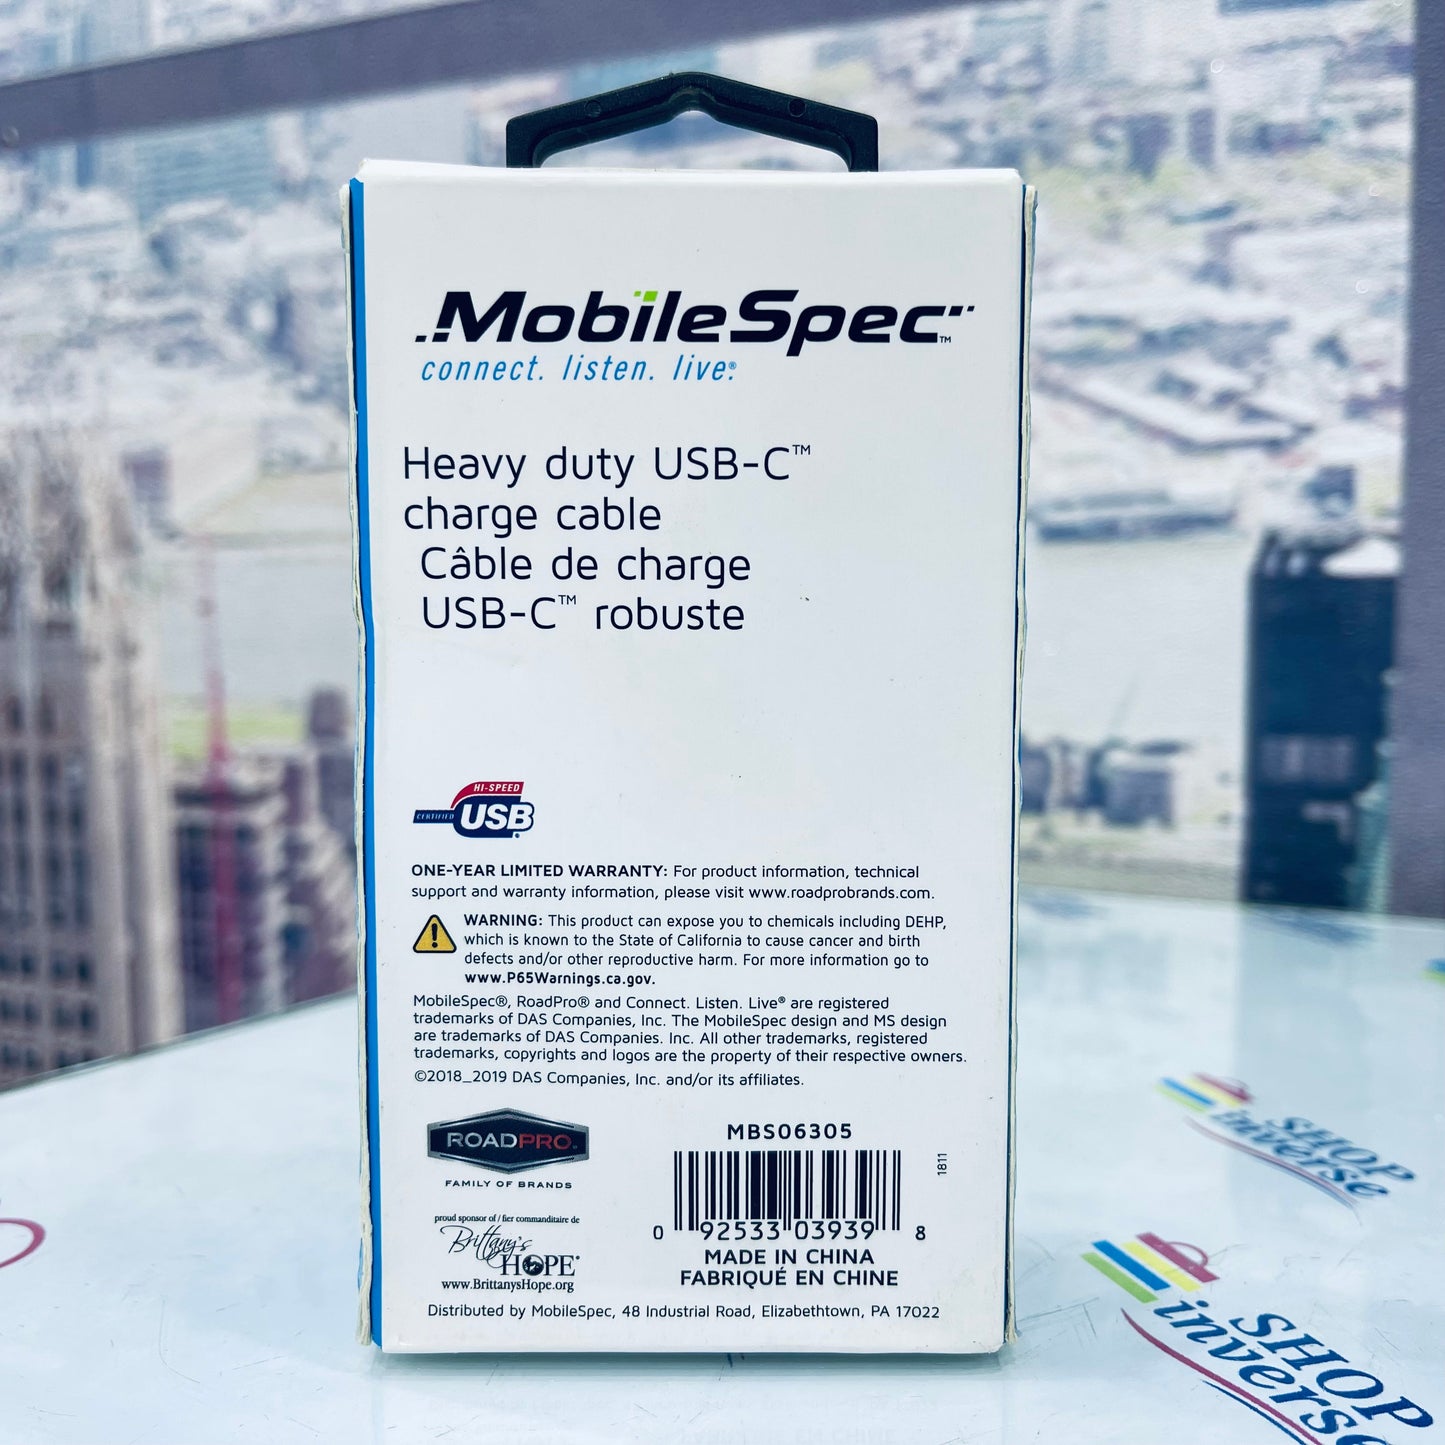 MobileSpec 15W Heavy duty USB-C Charging Cable SHOPINVERSE